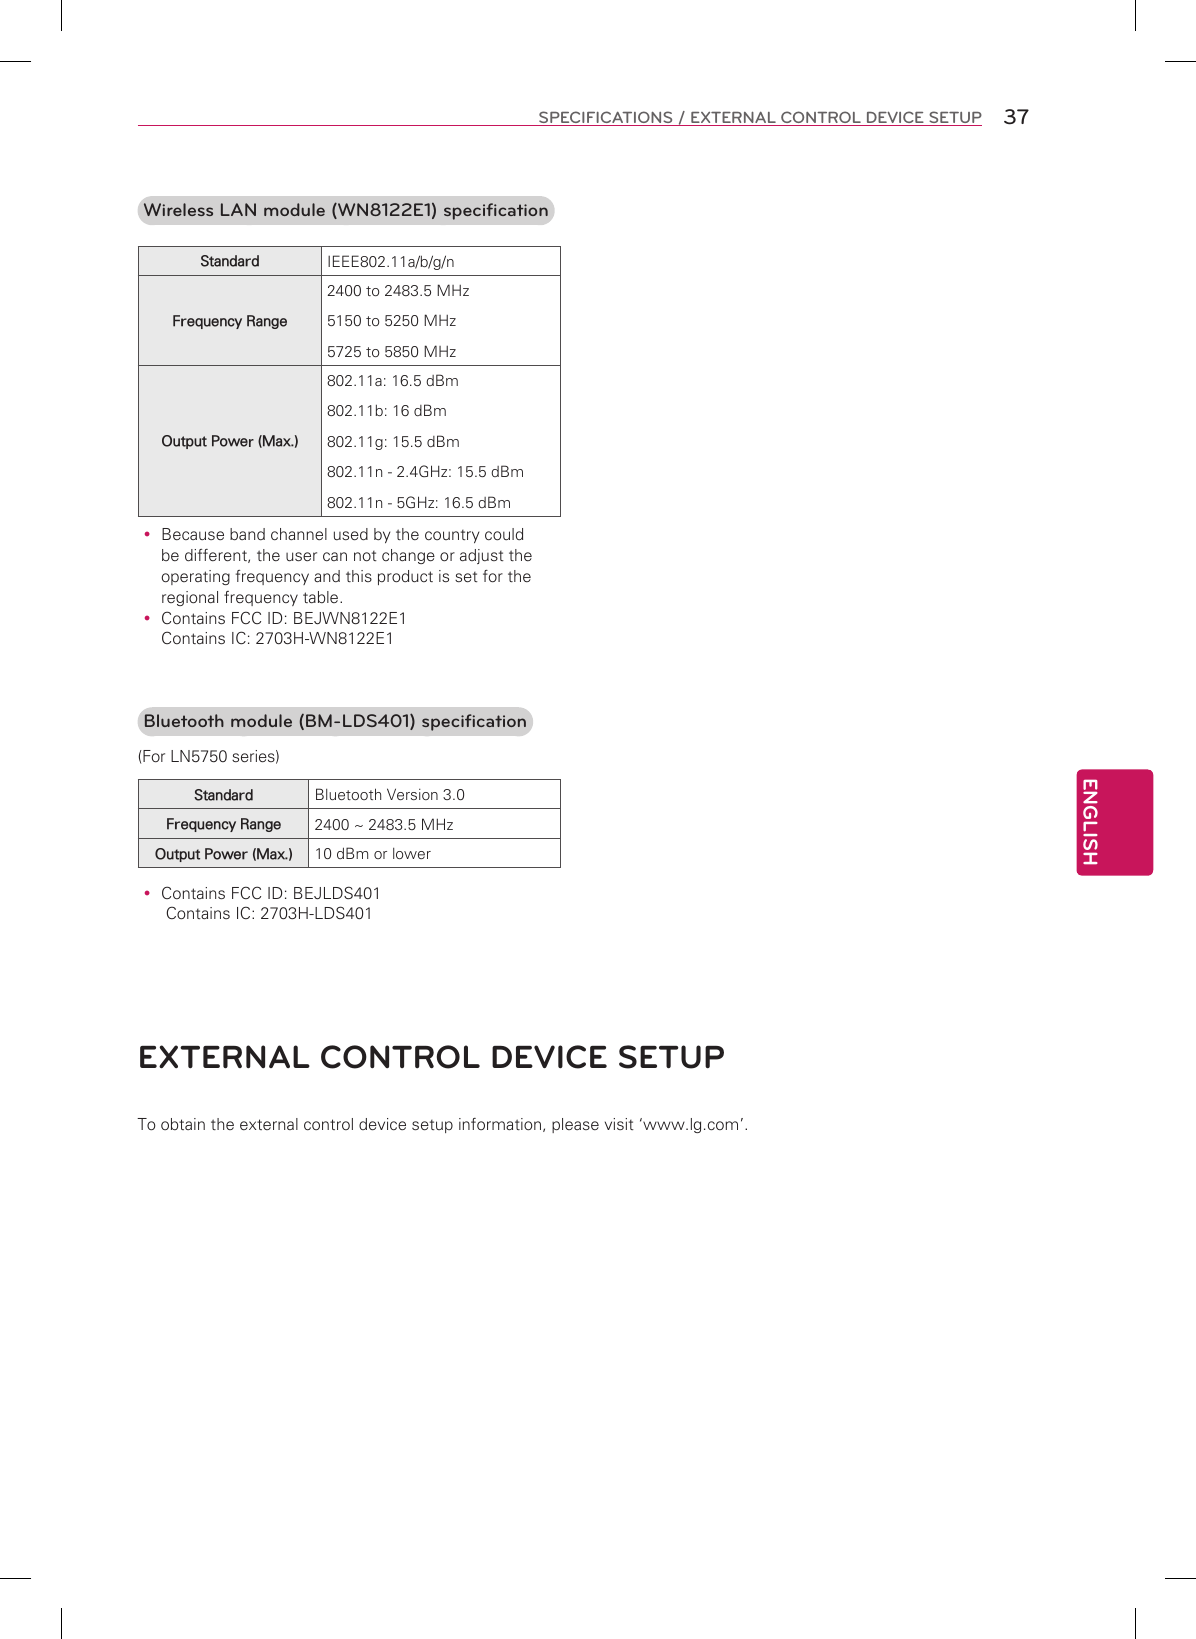 ENGLISH37SPECIFICATIONS / EXTERNAL CONTROL DEVICE SETUPEXTERNAL CONTROL DEVICE SETUPTo obtain the external control device setup information, please visit ‘www.lg.com’.Wireless LAN module (WN8122E1) specificationStandard IEEE802.11a/b/g/nFrequency Range2400 to 2483.5 MHz5150 to 5250 MHz5725 to 5850 MHzOutput Power (Max.)802.11a: 16.5 dBm802.11b: 16 dBm802.11g: 15.5 dBm802.11n - 2.4GHz: 15.5 dBm802.11n - 5GHz: 16.5 dBm Because band channel used by the country could be different, the user can not change or adjust the operating frequency and this product is set for the regional frequency table. Contains FCC ID: BEJWN8122E1  Contains IC: 2703H-WN8122E1 Bluetooth module (BM-LDS401) specification (For LN5750 series)Standard Bluetooth Version 3.0Frequency Range 2400 ~ 2483.5 MHzOutput Power (Max.) 10 dBm or lower Contains FCC ID: BEJLDS401  Contains IC: 2703H-LDS401